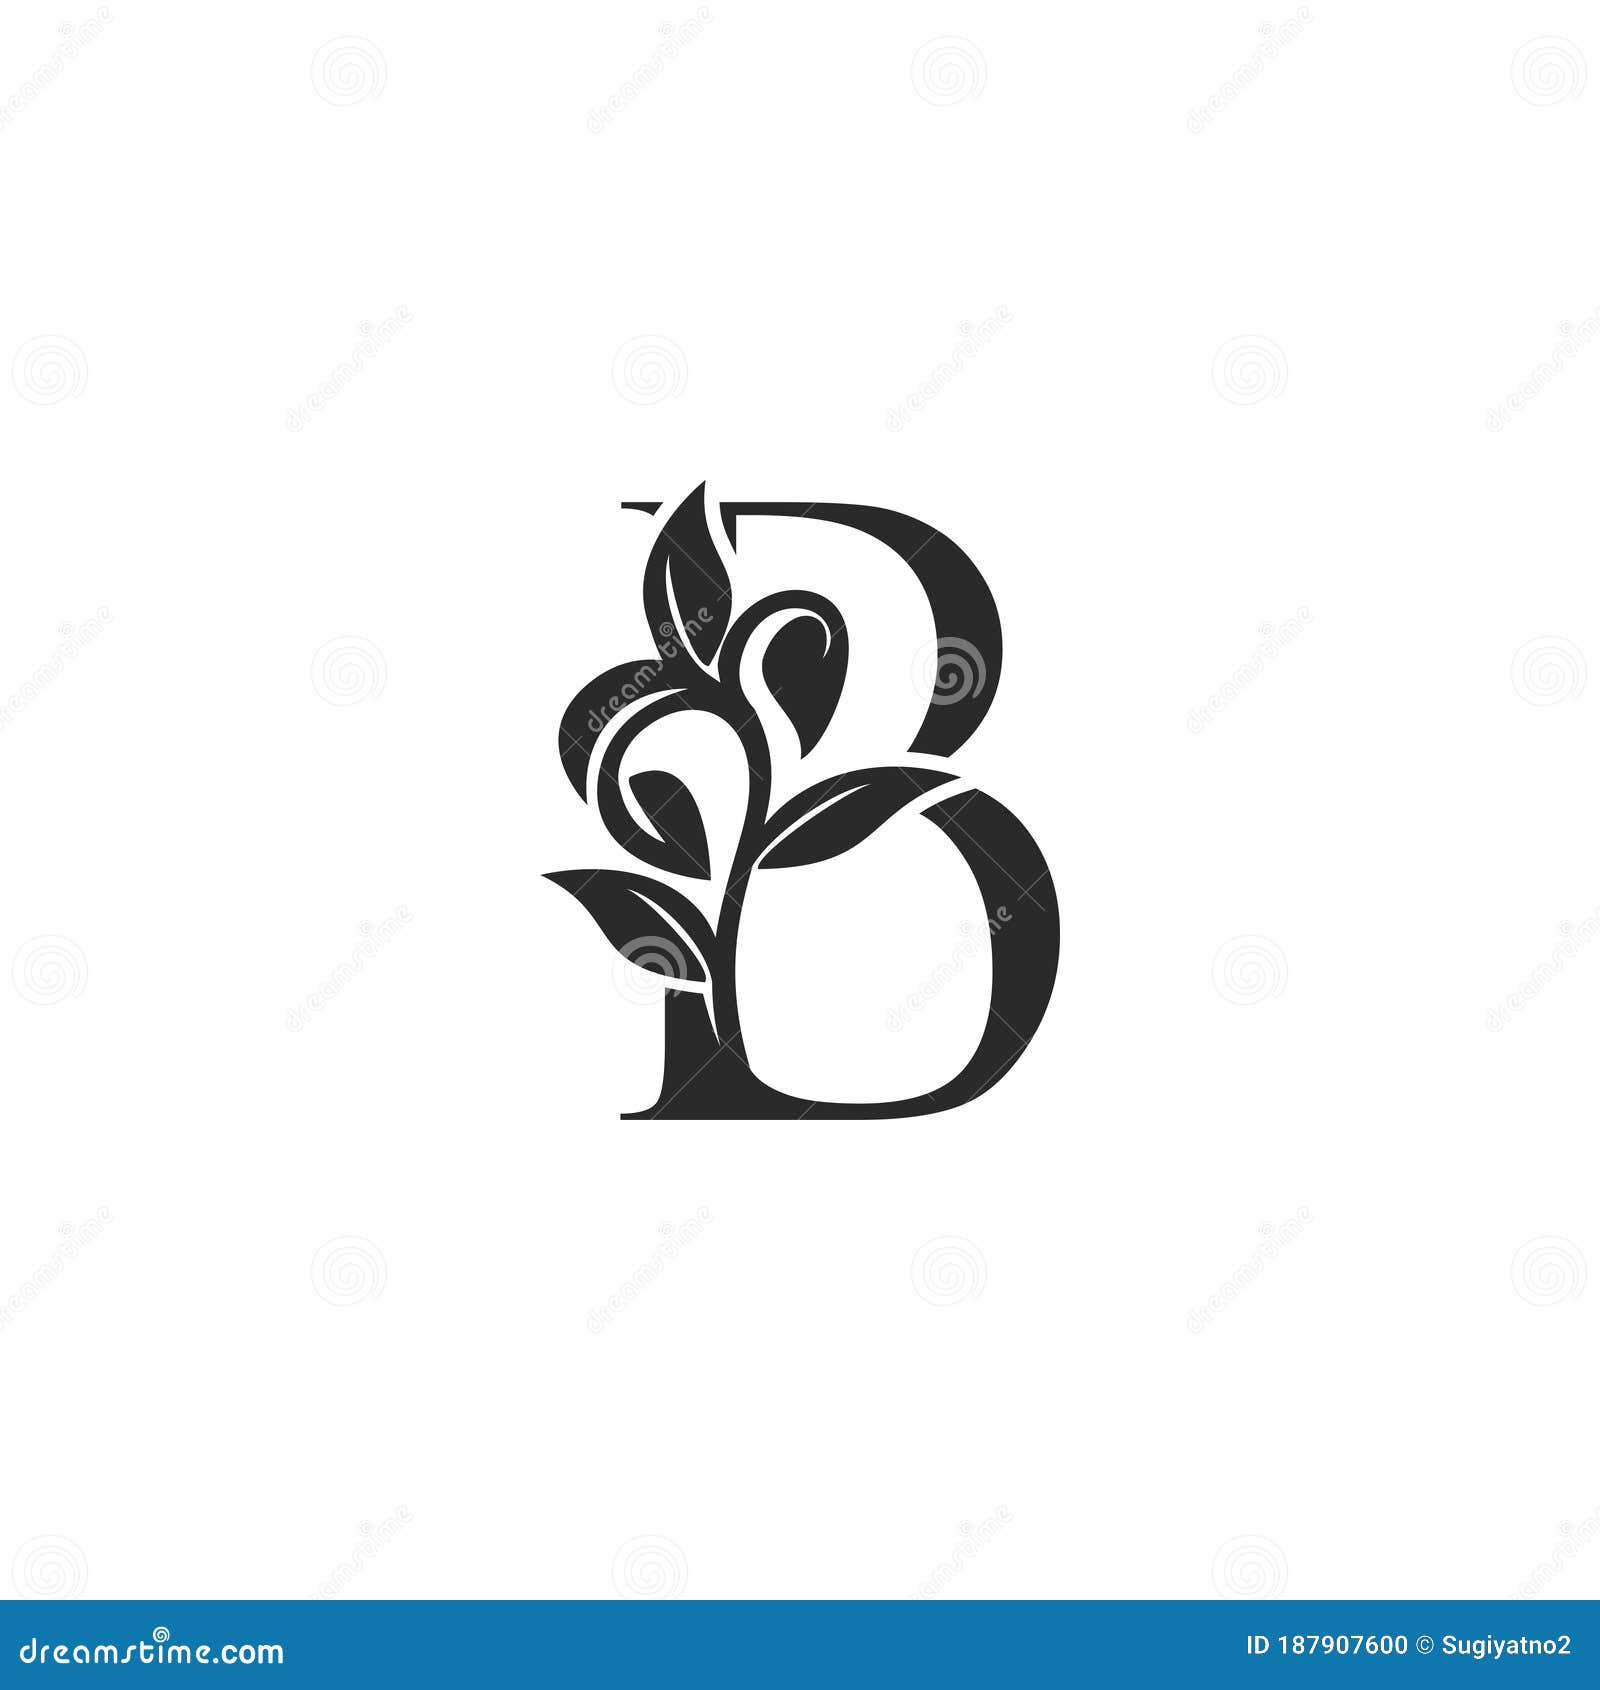 Premium Vector  Luxury signature logo design template for your brand with  nature concept